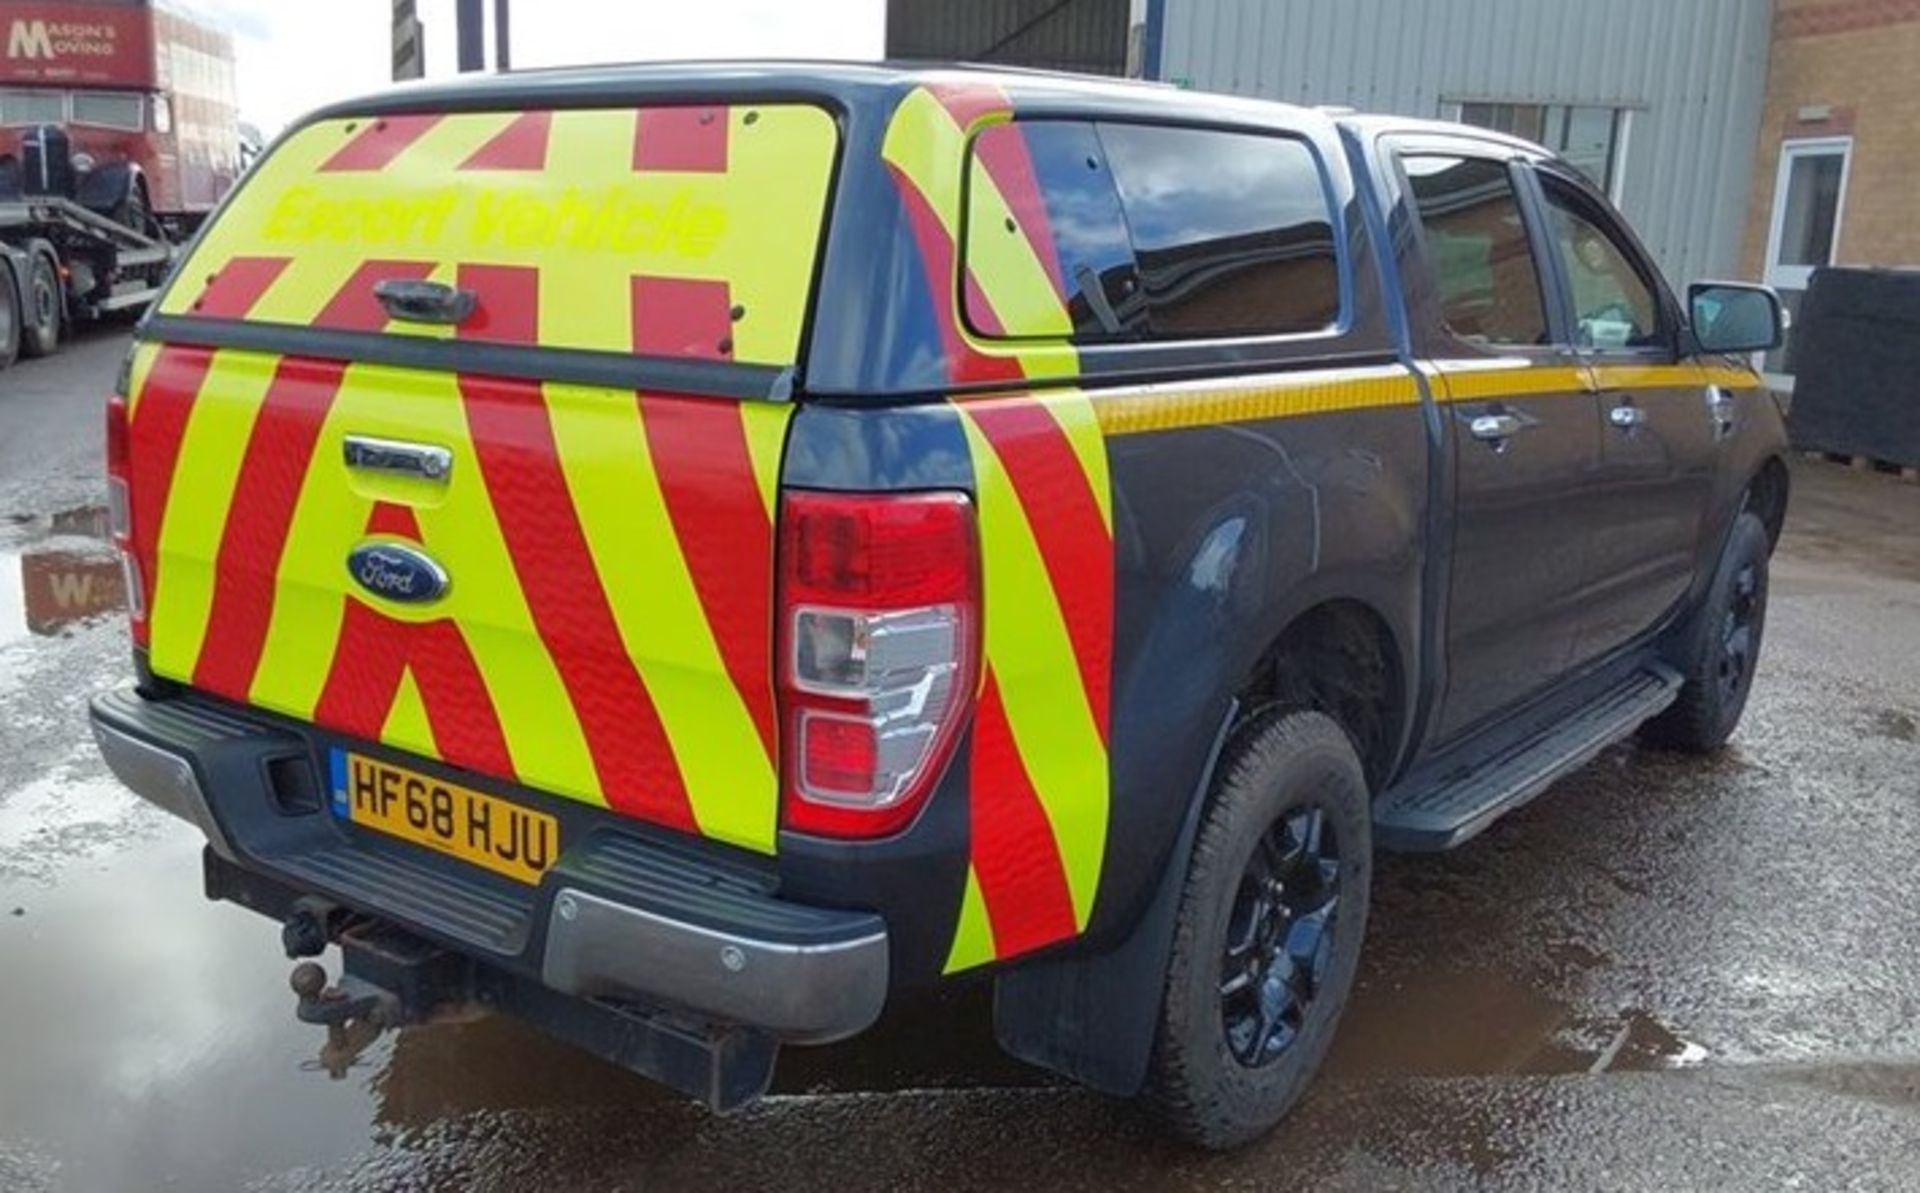 2018/68 REG FORD RANGER LIMITED 4X4 DCB TDCI 2.2 DIESEL MANUAL PICK UP, SHOWING 2 FORMER KEEPERS - Image 3 of 8